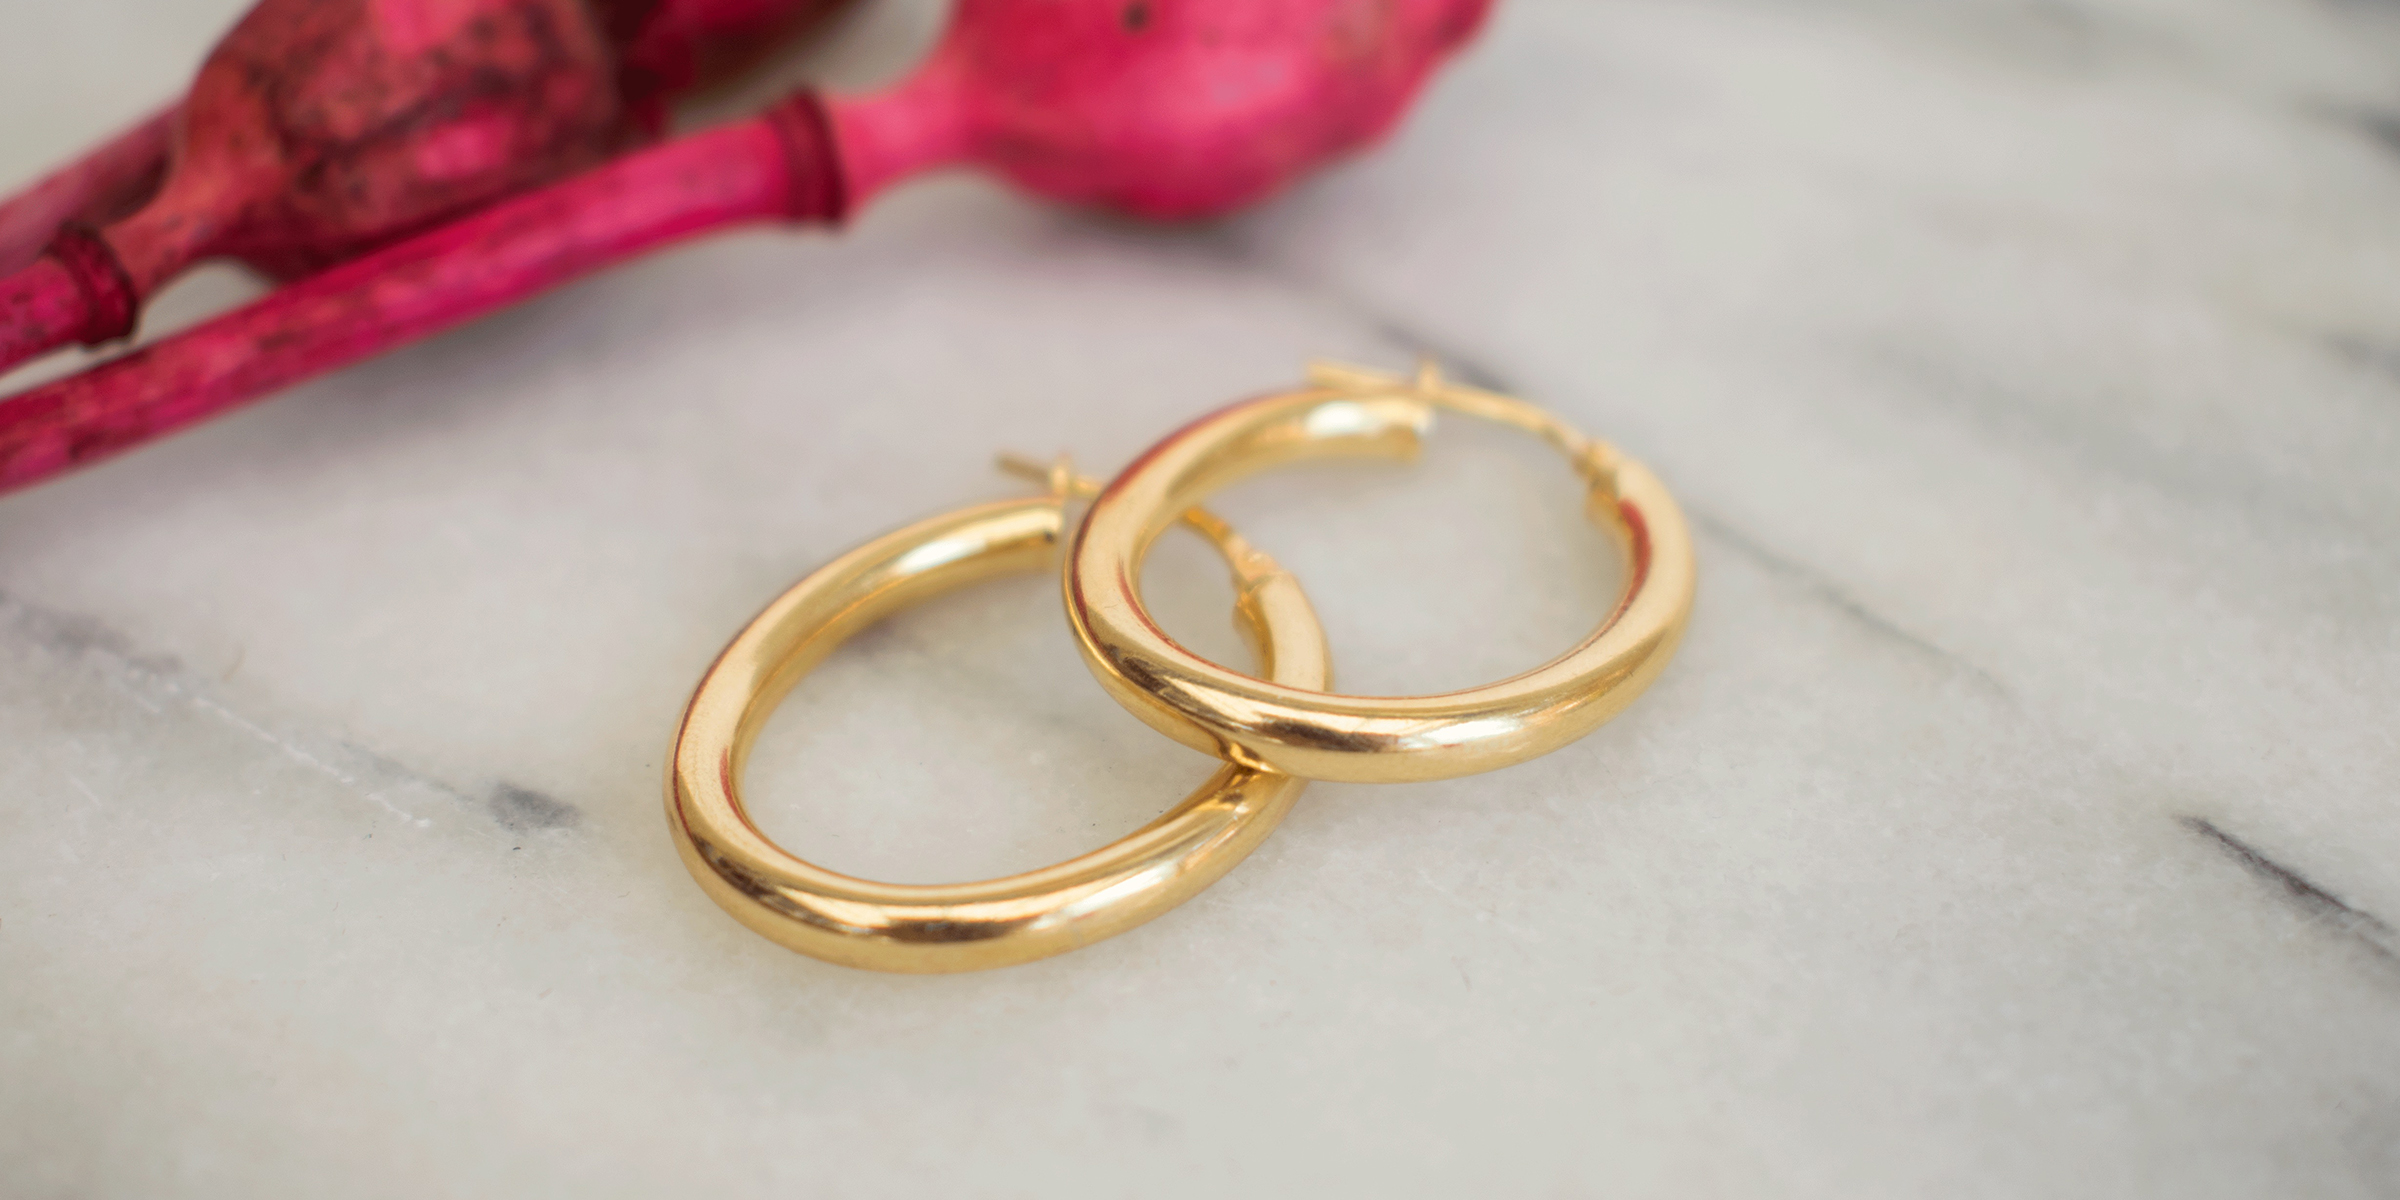 A pair of gold earrings on a marble surface | Source: Shutterstock